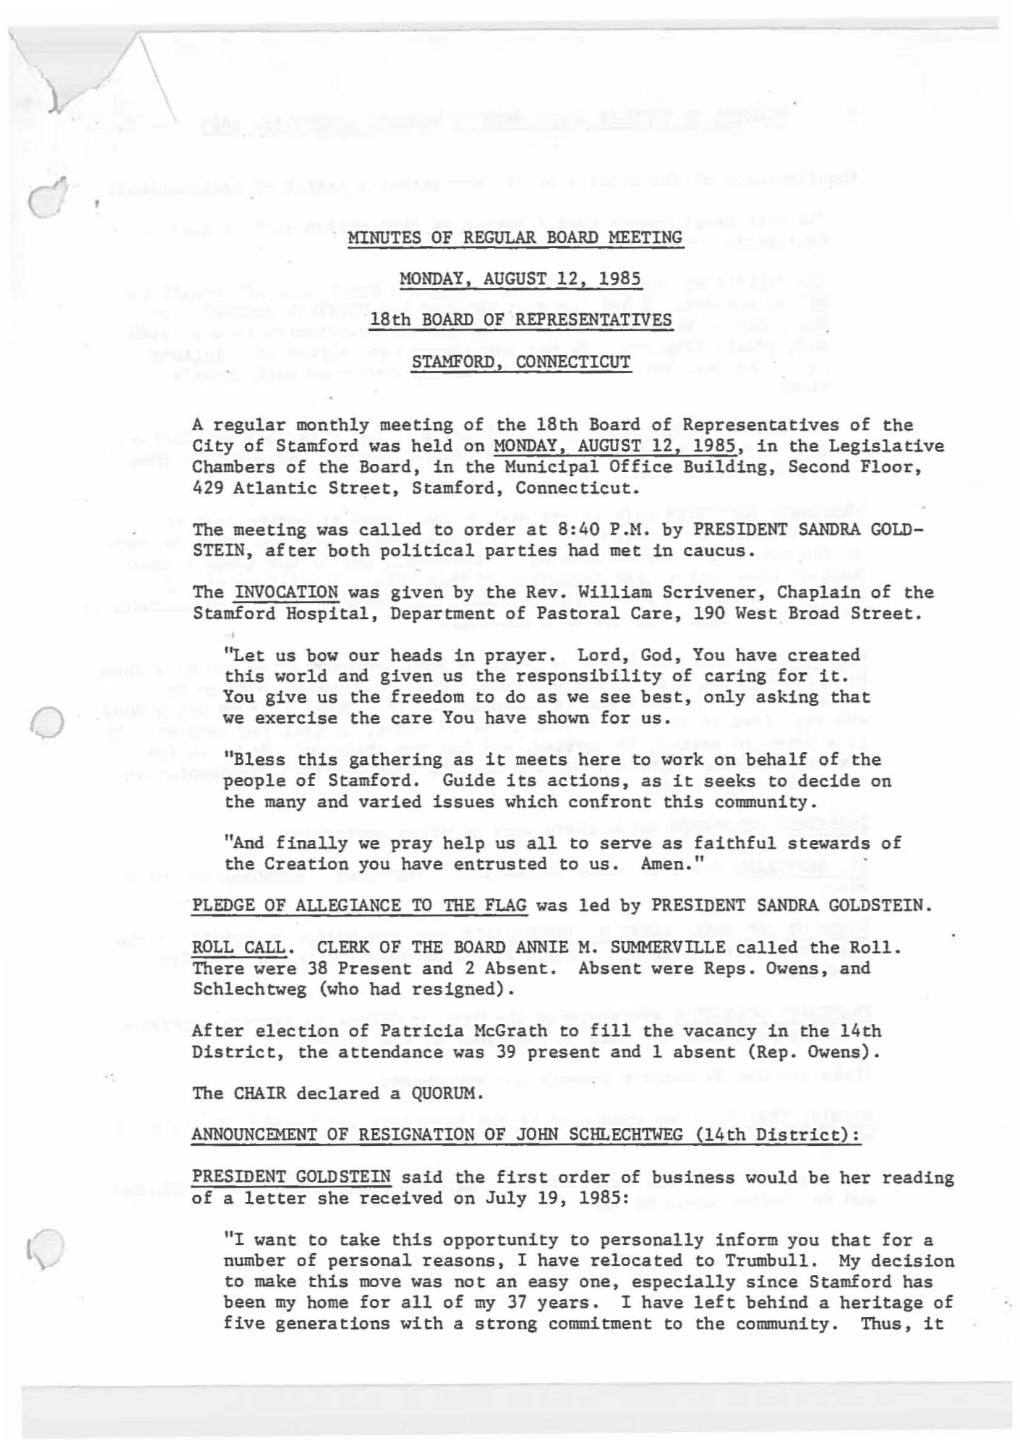 Minutes of Regular Board Meeting Monday, August 12, 1985 2